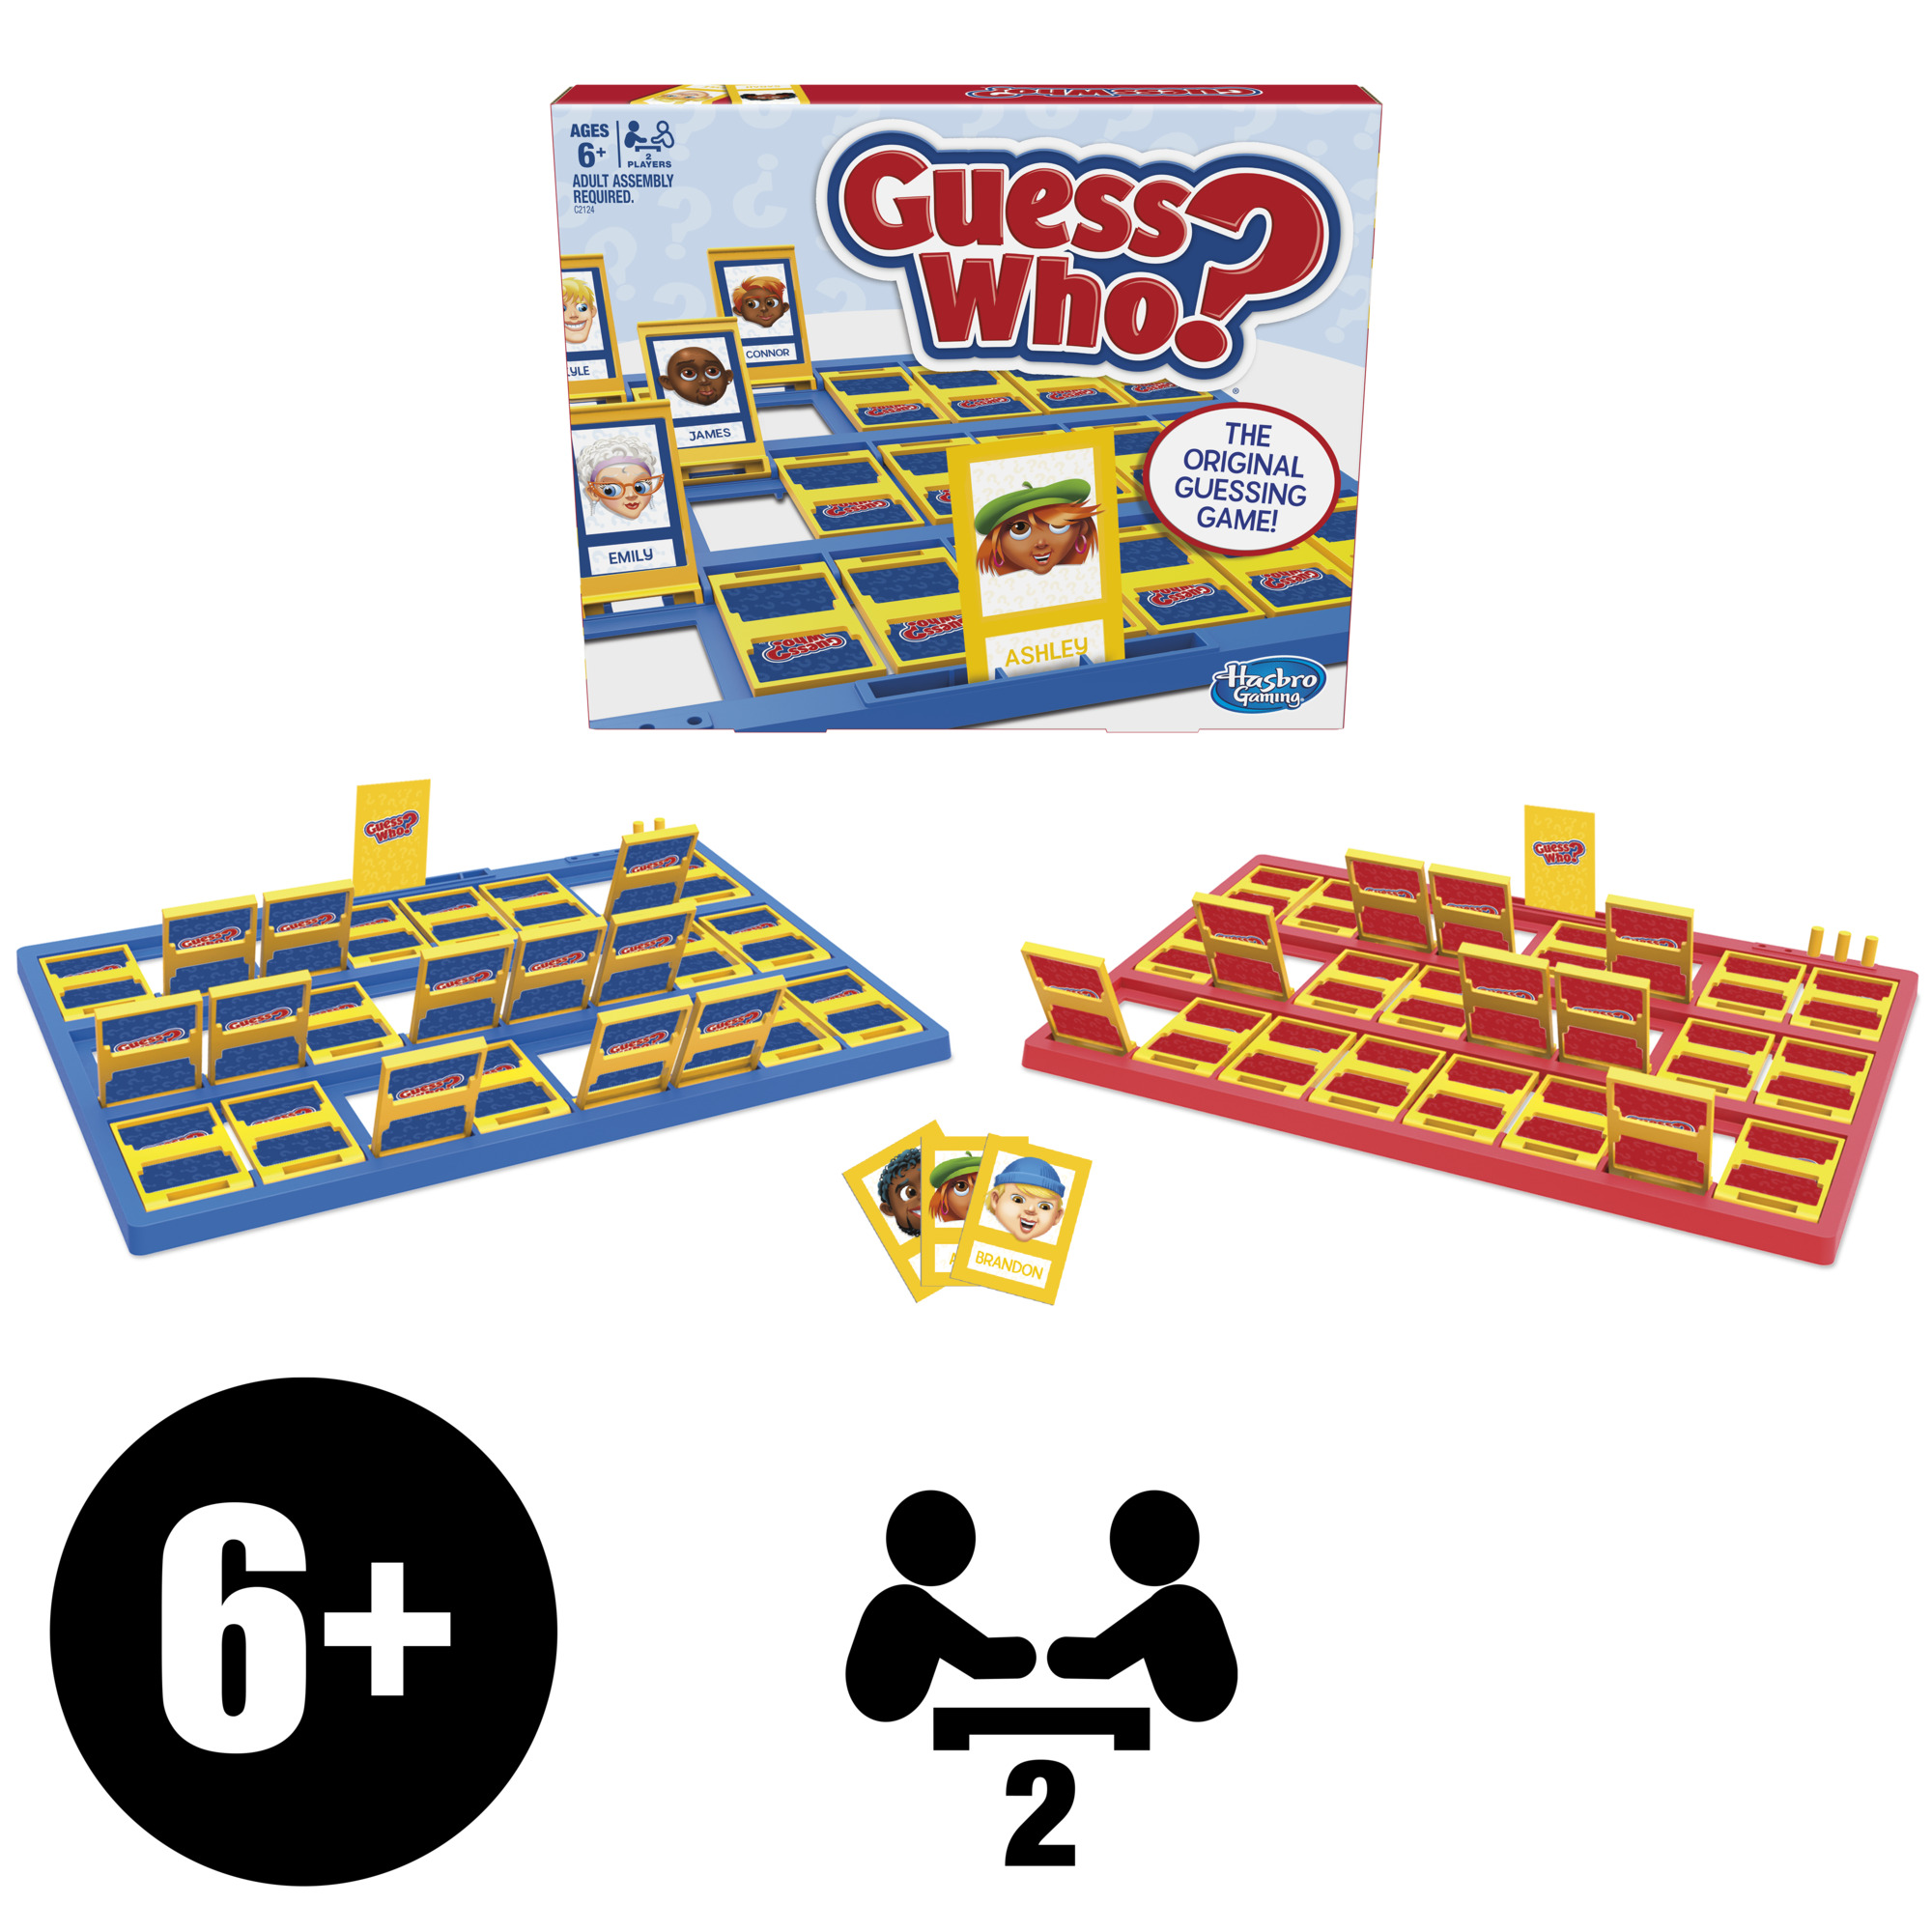 Guess Who? Original Guessing Game Board Game for Kids and Family Ages 6 and Up, 2 Players - image 3 of 10